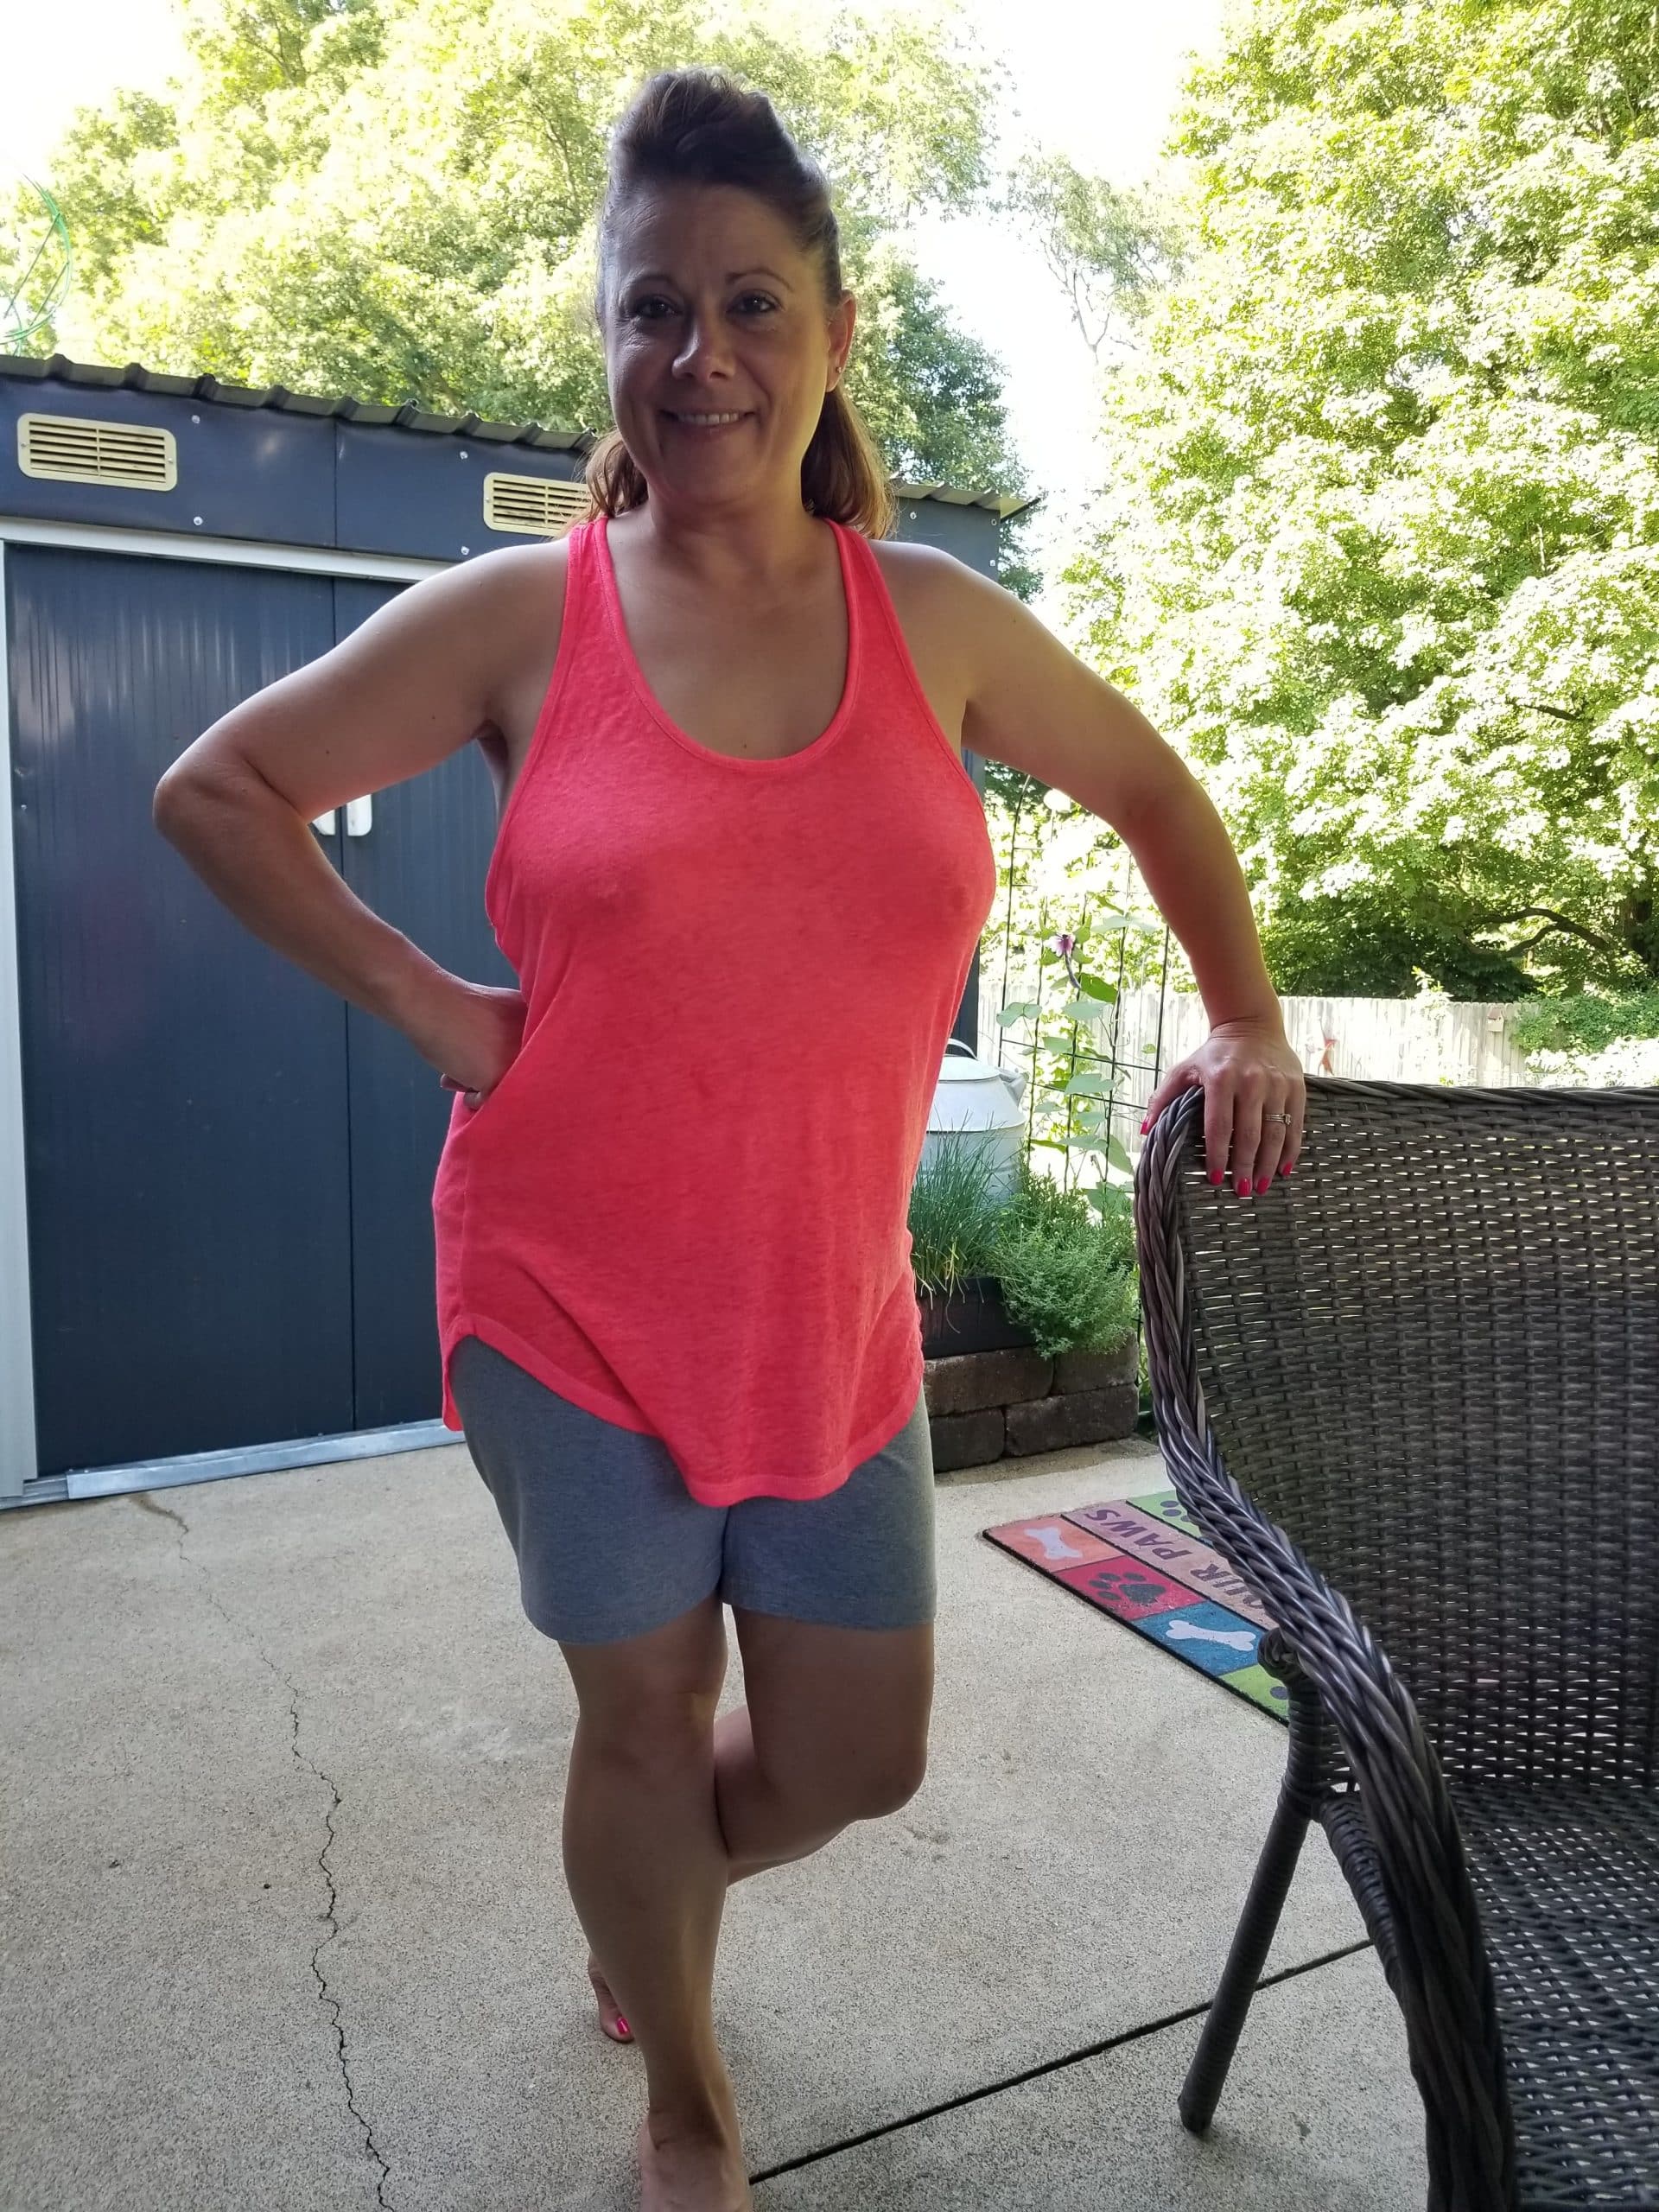 Tanya enjoying porch in a pink see thru top real nudity milf pics howife boobs flash